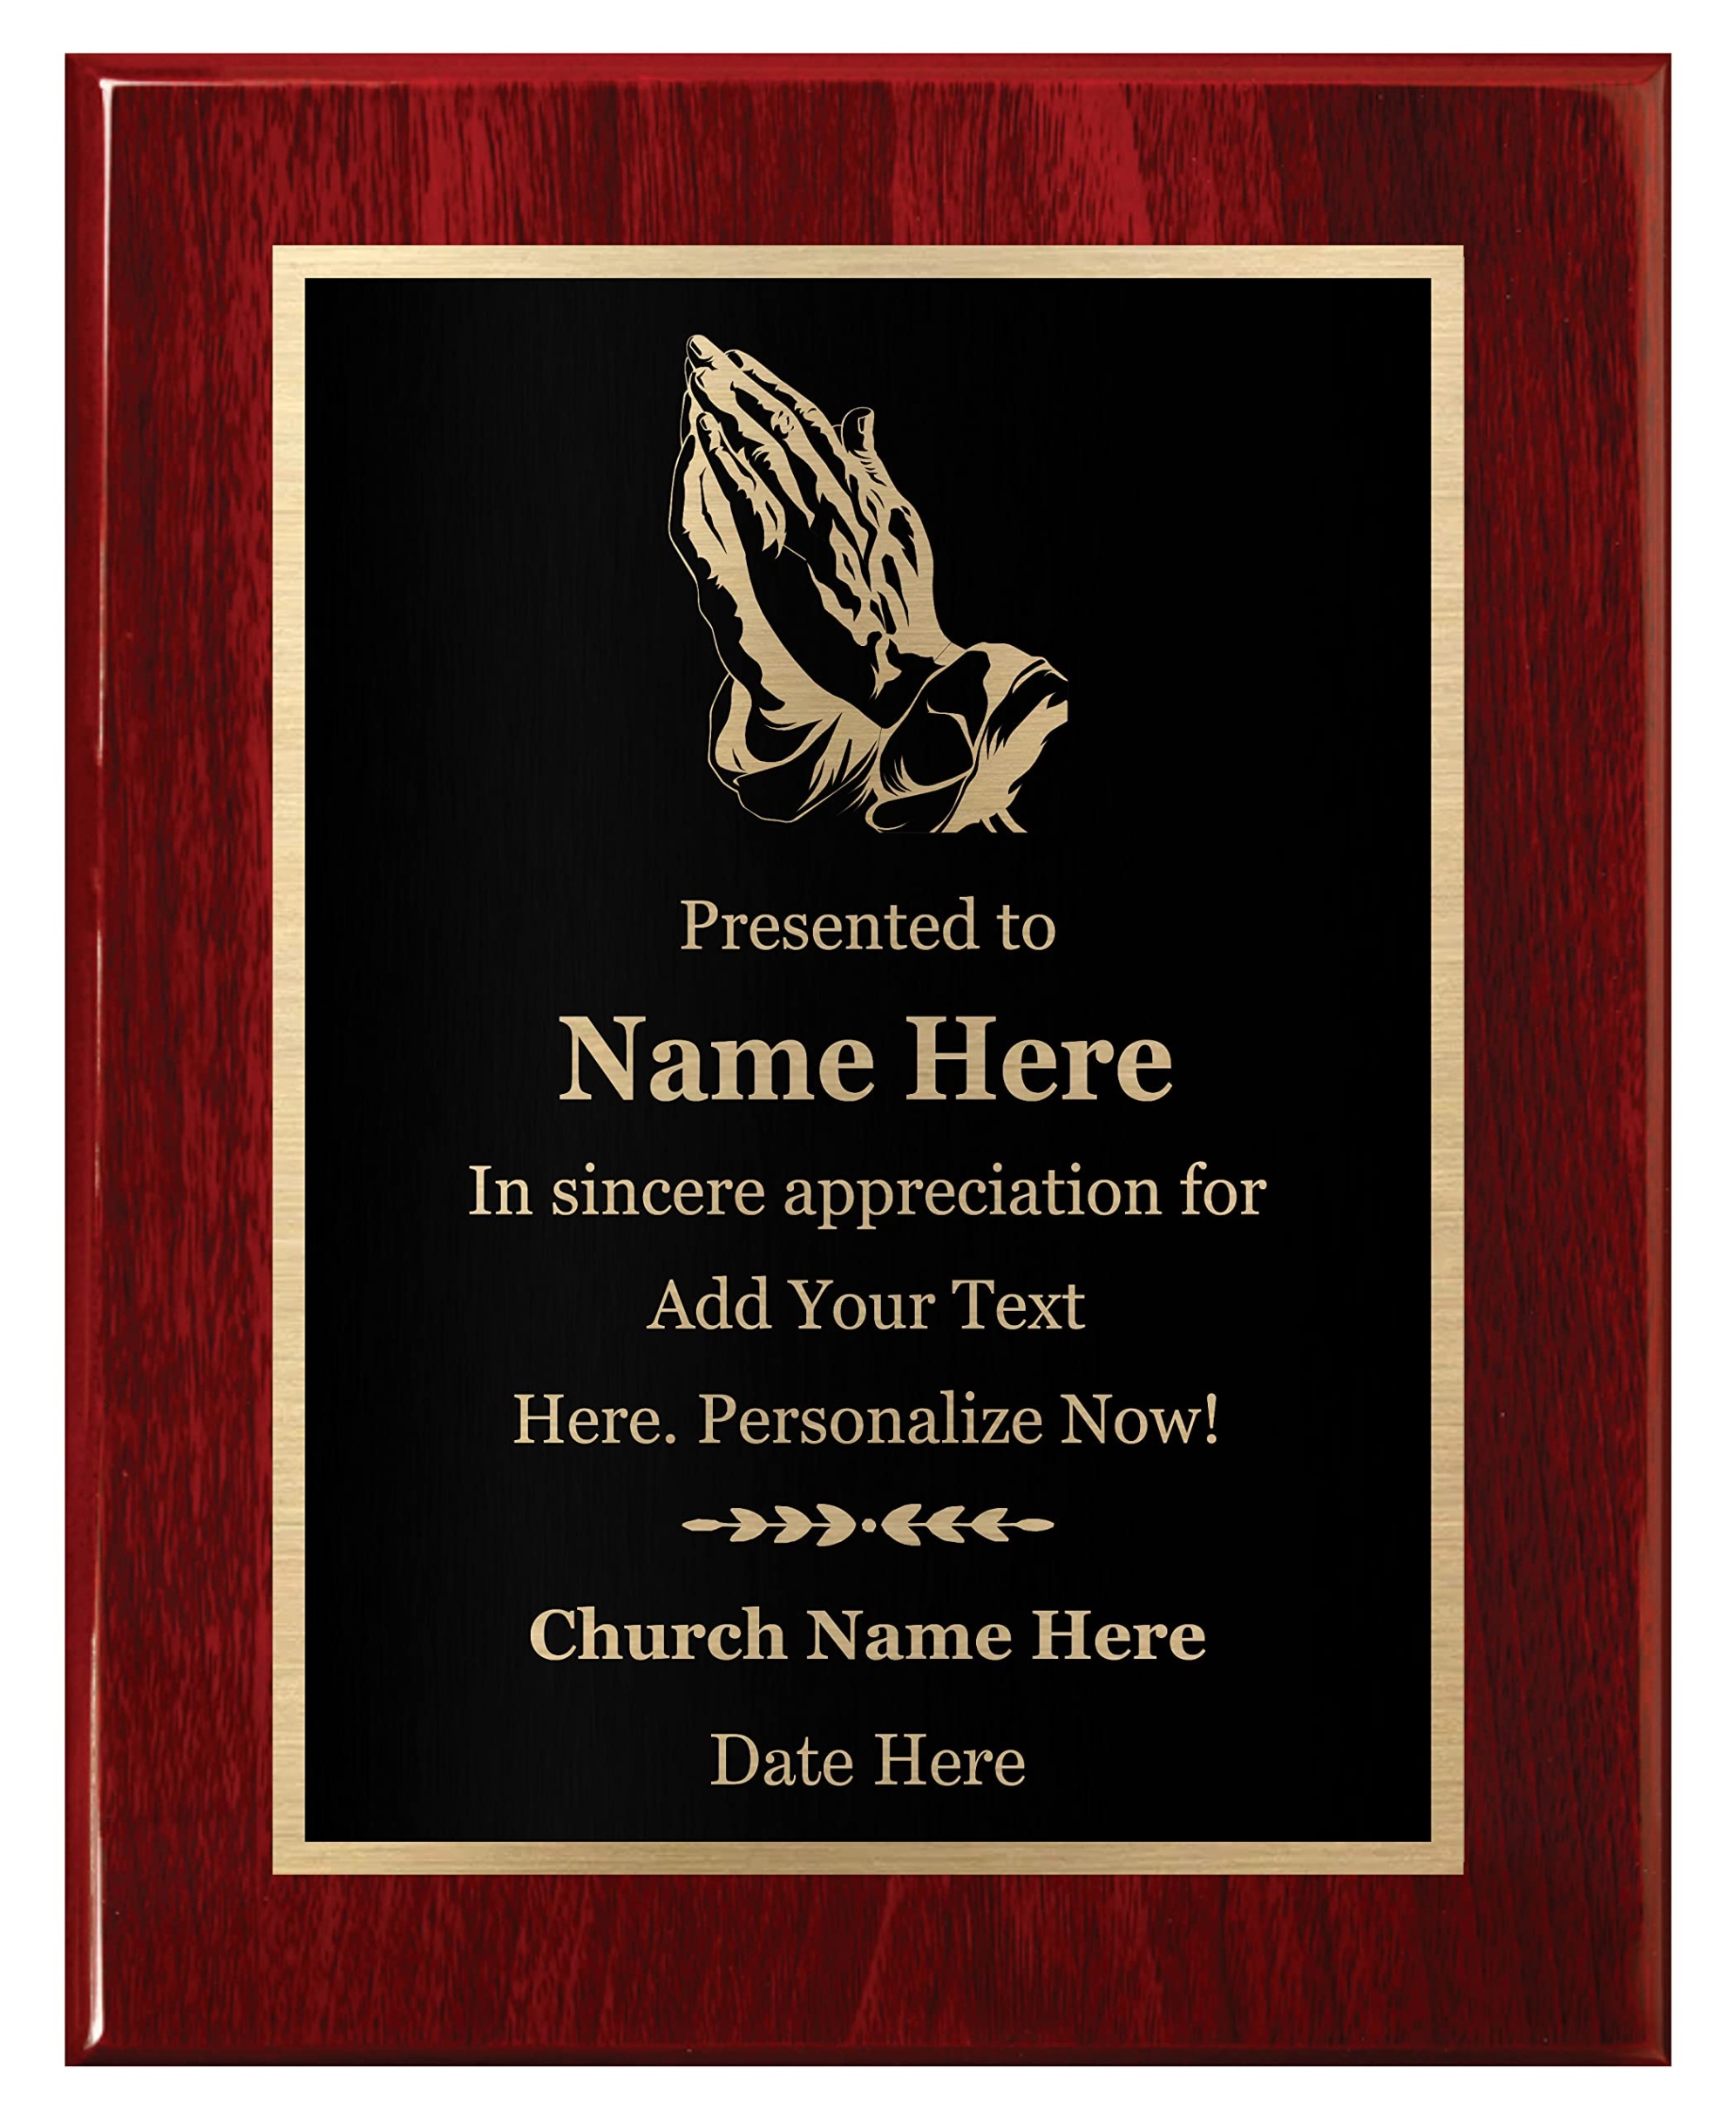 award plaque designs Bulan 1 Personalized Religious Award x, Customized Plaque for Church, Temple -  Executive Series Mahogany Piano Wood Board, Modern Design - Customize Now -